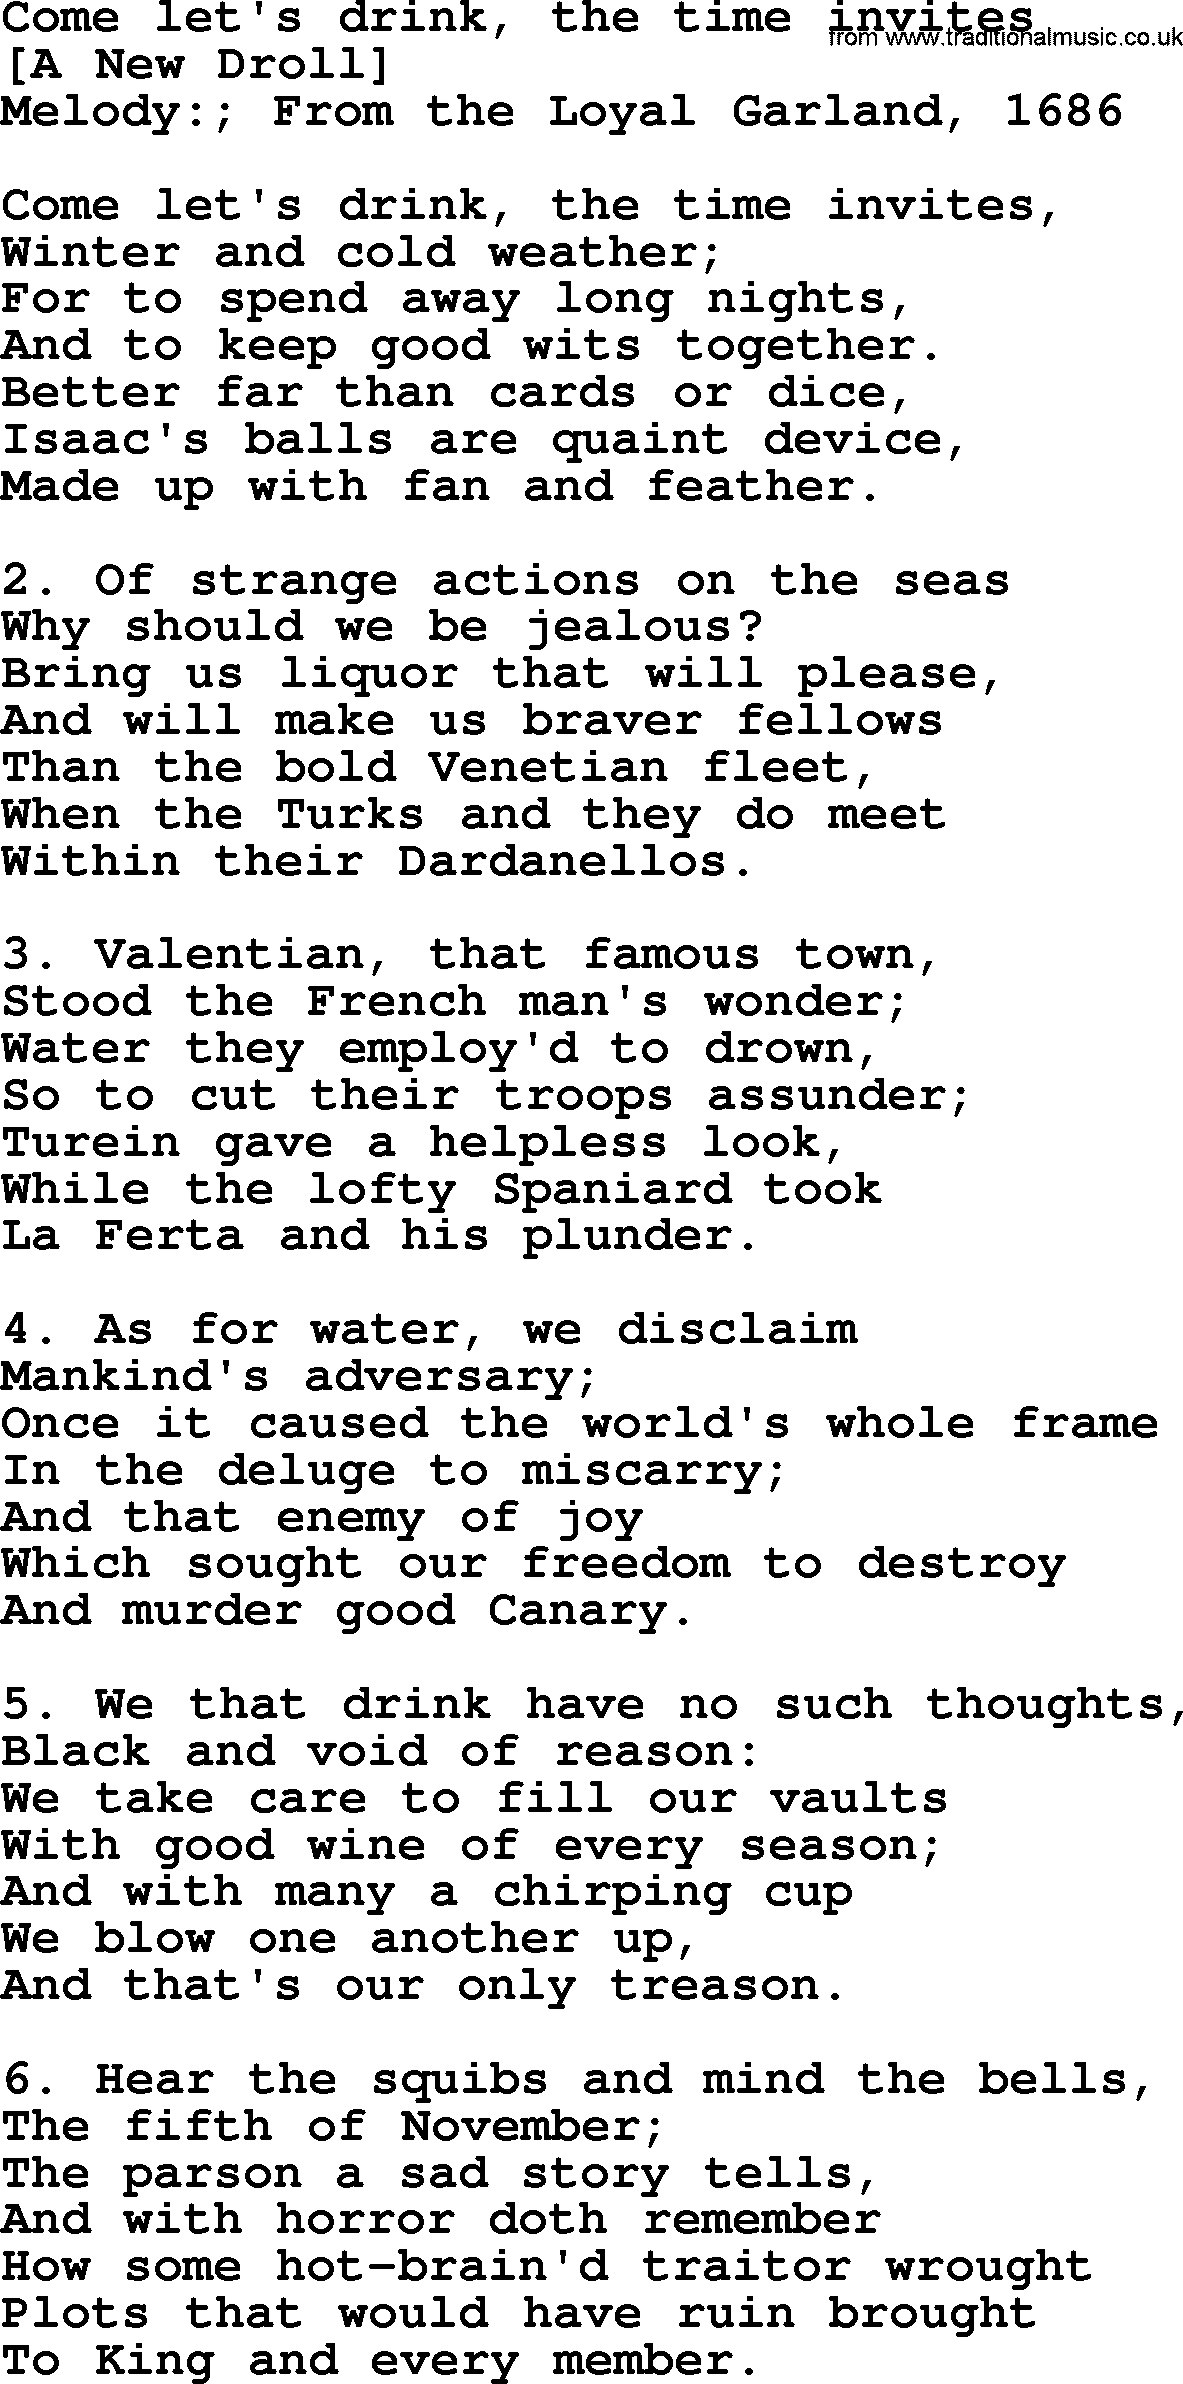 Old English Song: Come Let's Drink, The Time Invites lyrics